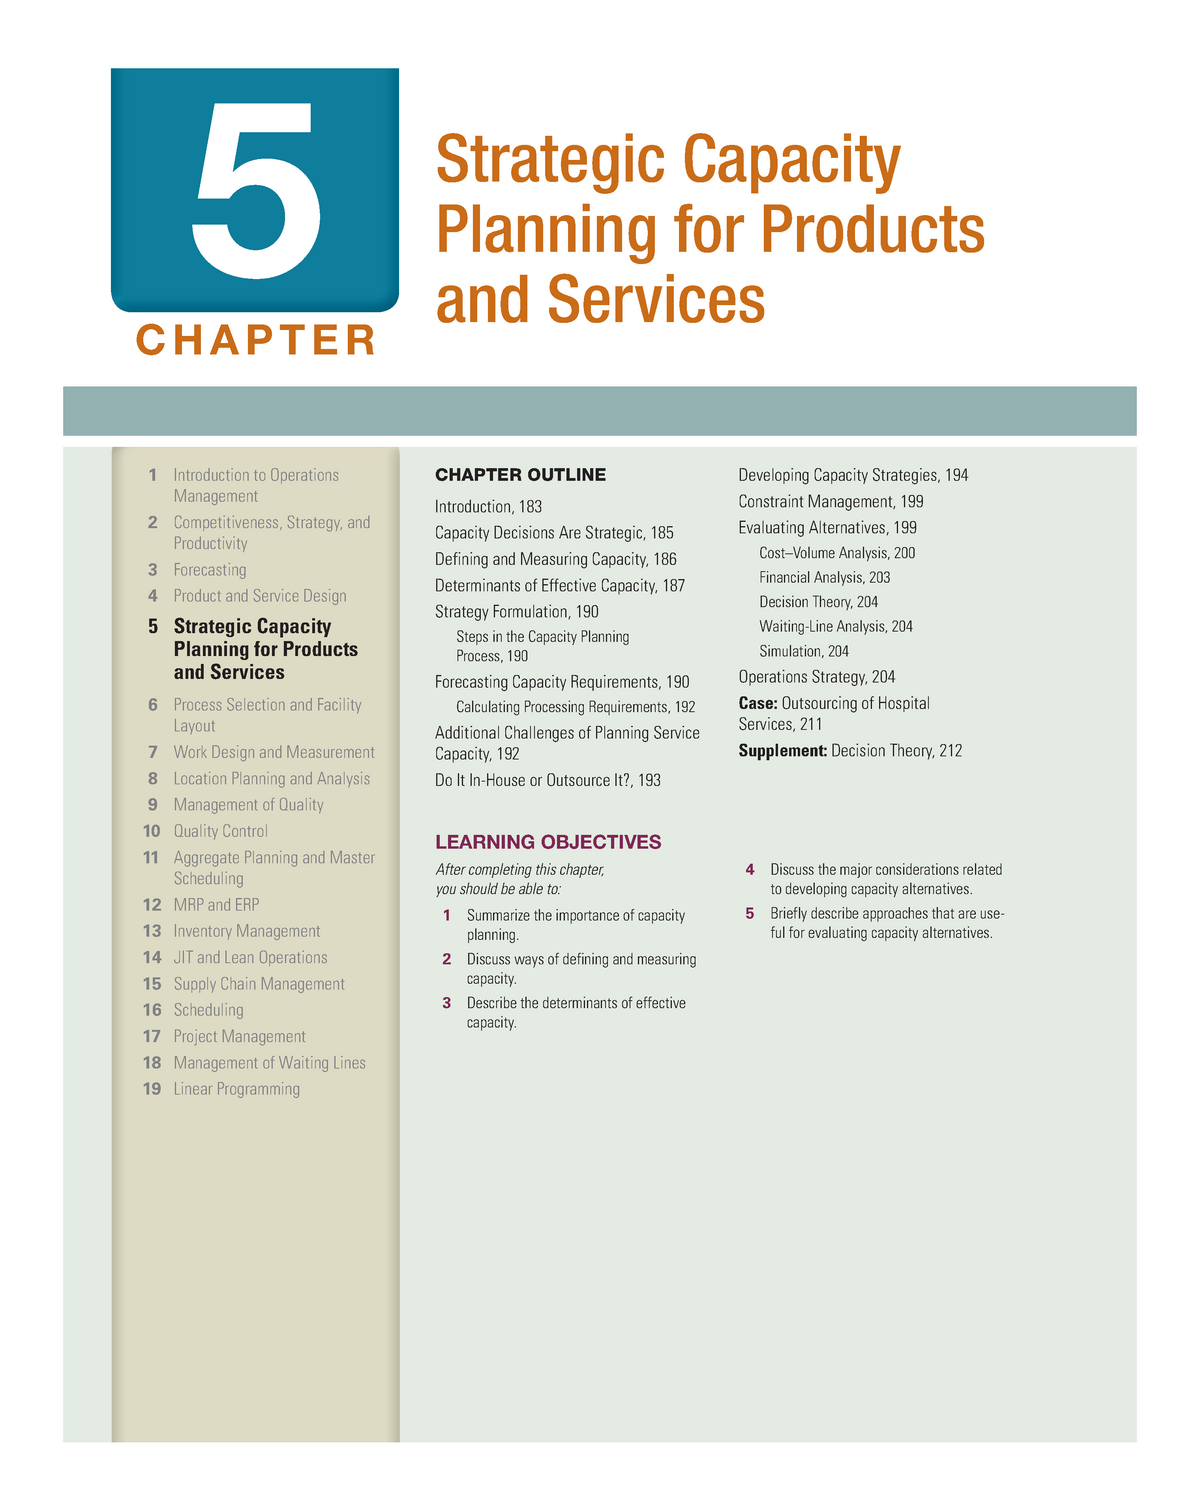 strategic capacity planning for products and services slideshare